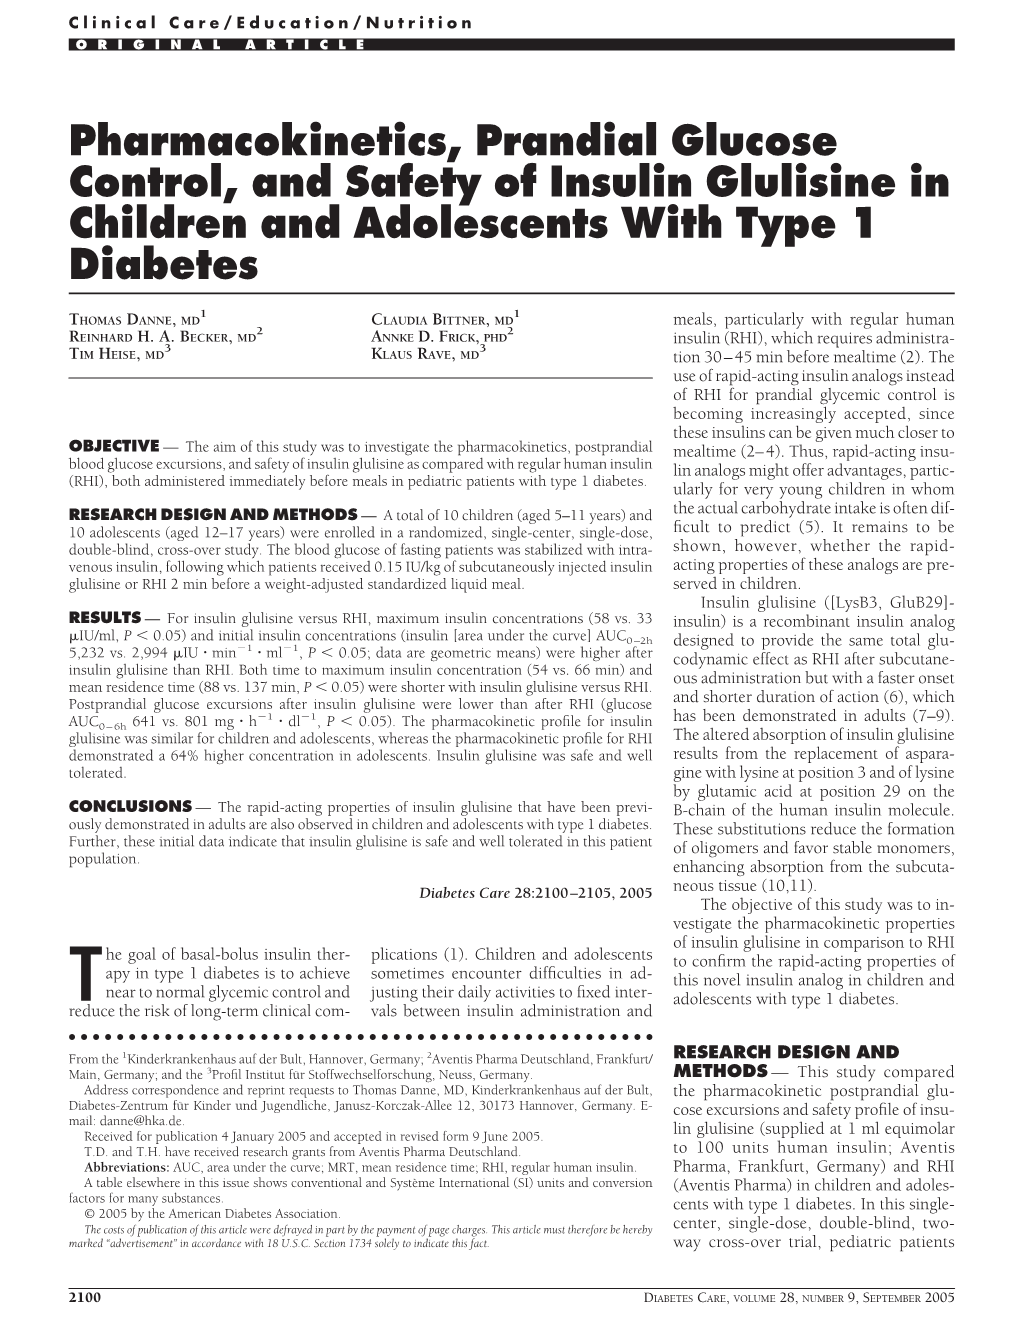 Pharmacokinetics, Prandial Glucose Control, and Safety of Insulin Glulisine in Children and Adolescents with Type 1 Diabetes